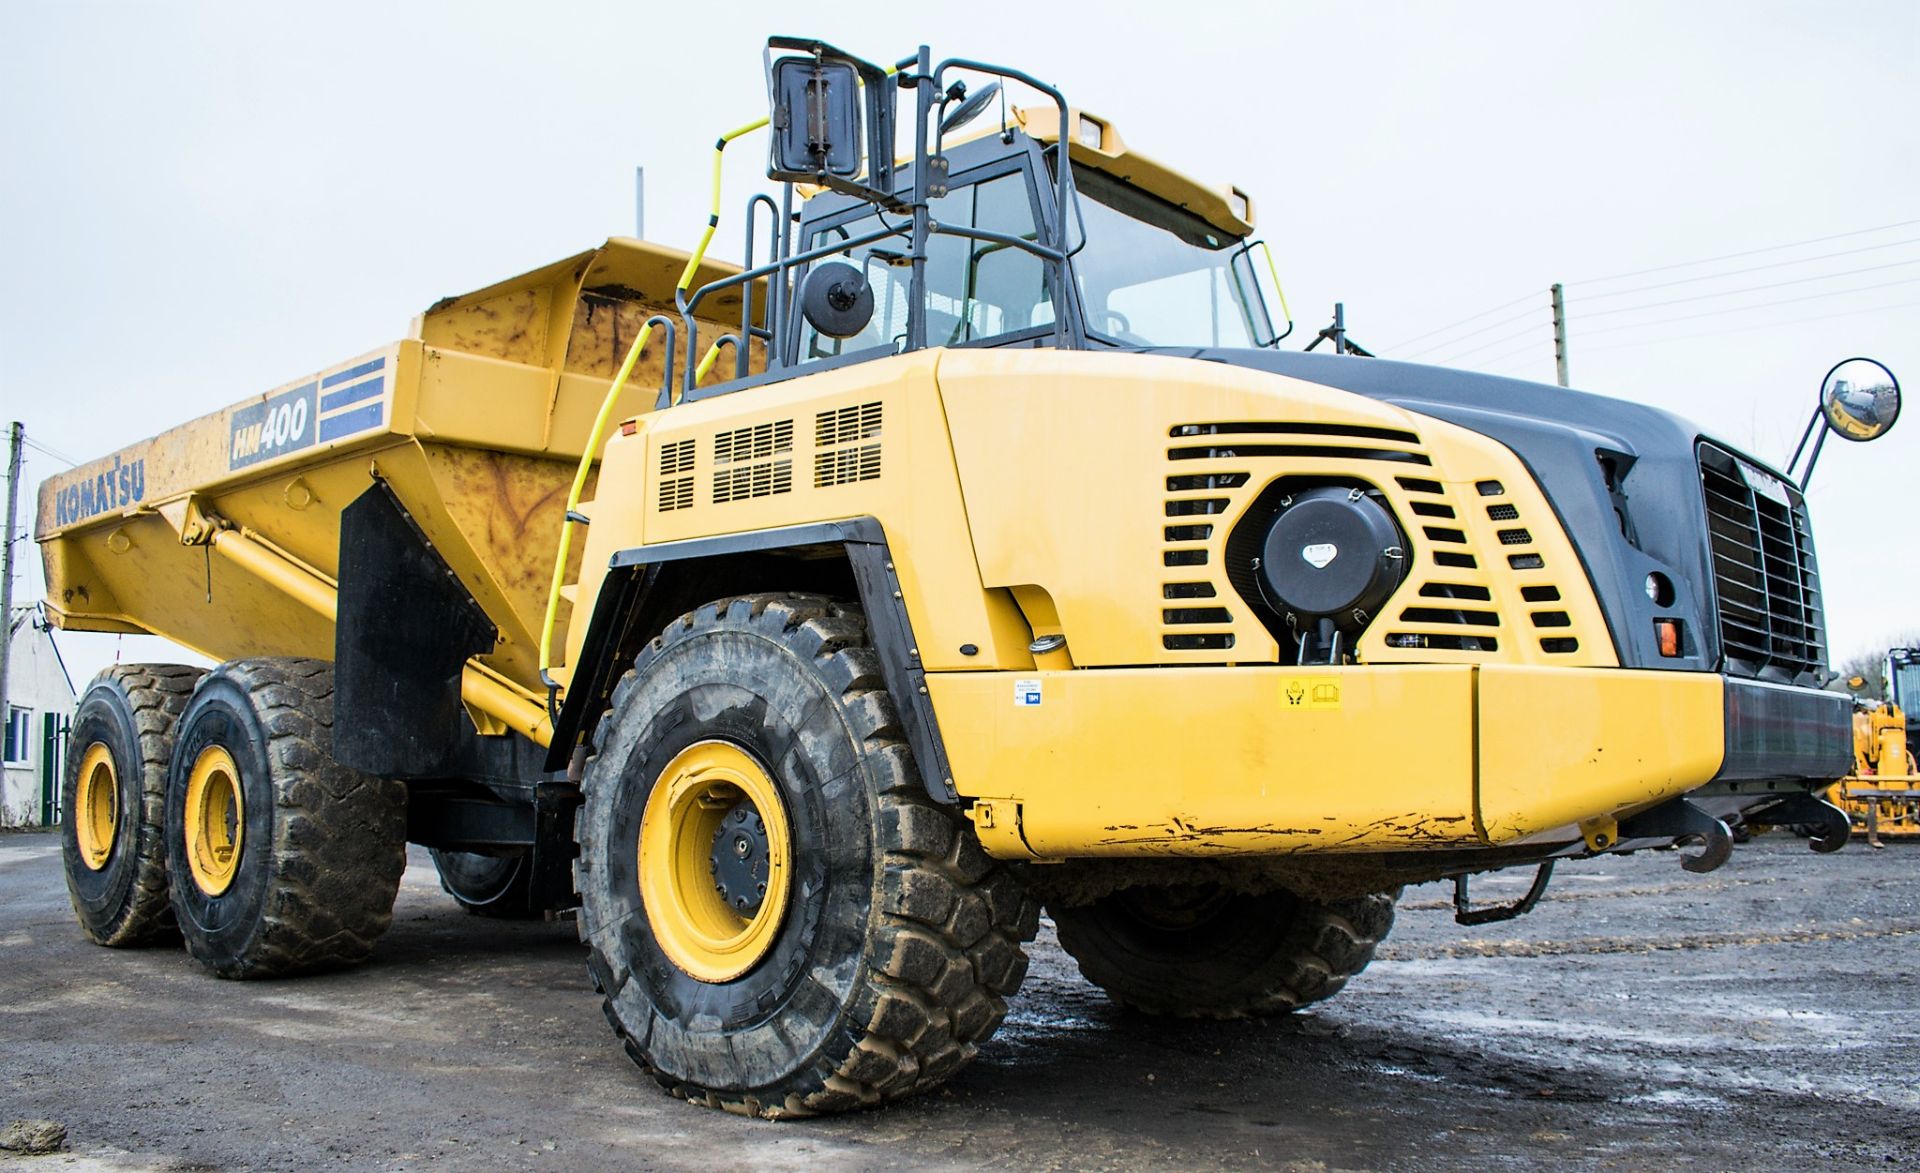 Komatsu HM400-3 articulated dump truck  Year: 2015 S/N: 3804 Recorded Hours: 5647 KOM455 - Image 2 of 14